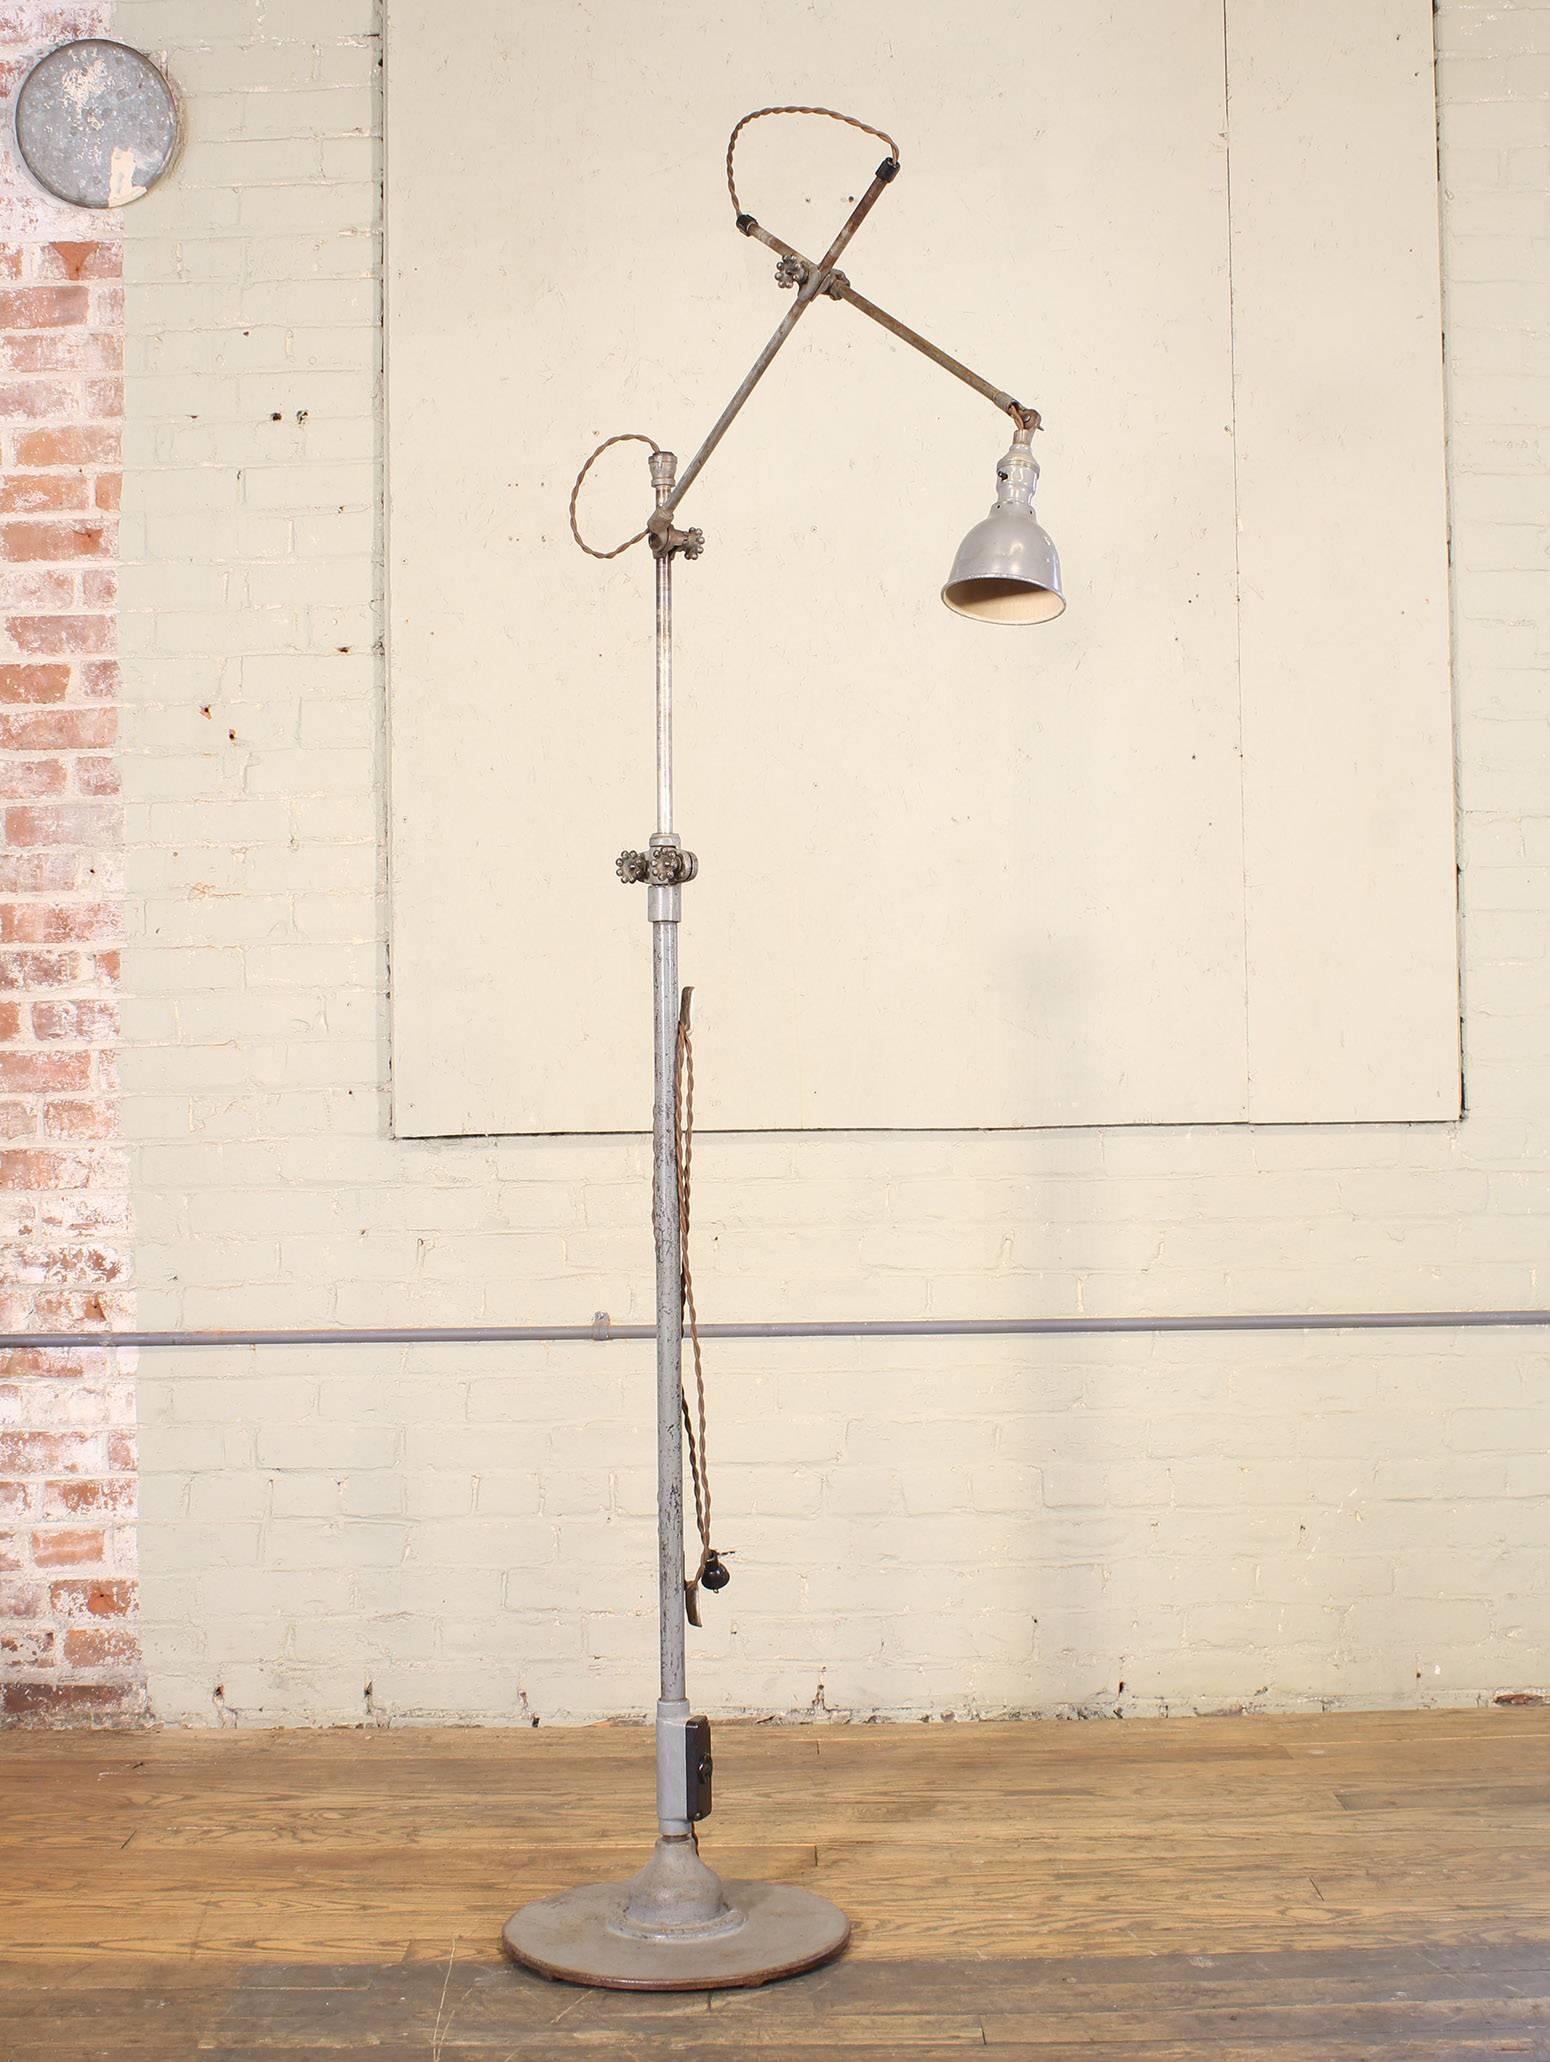 Portable O C white floor lamp with 3 GP base and telescopic upright. Measure: Stands 73